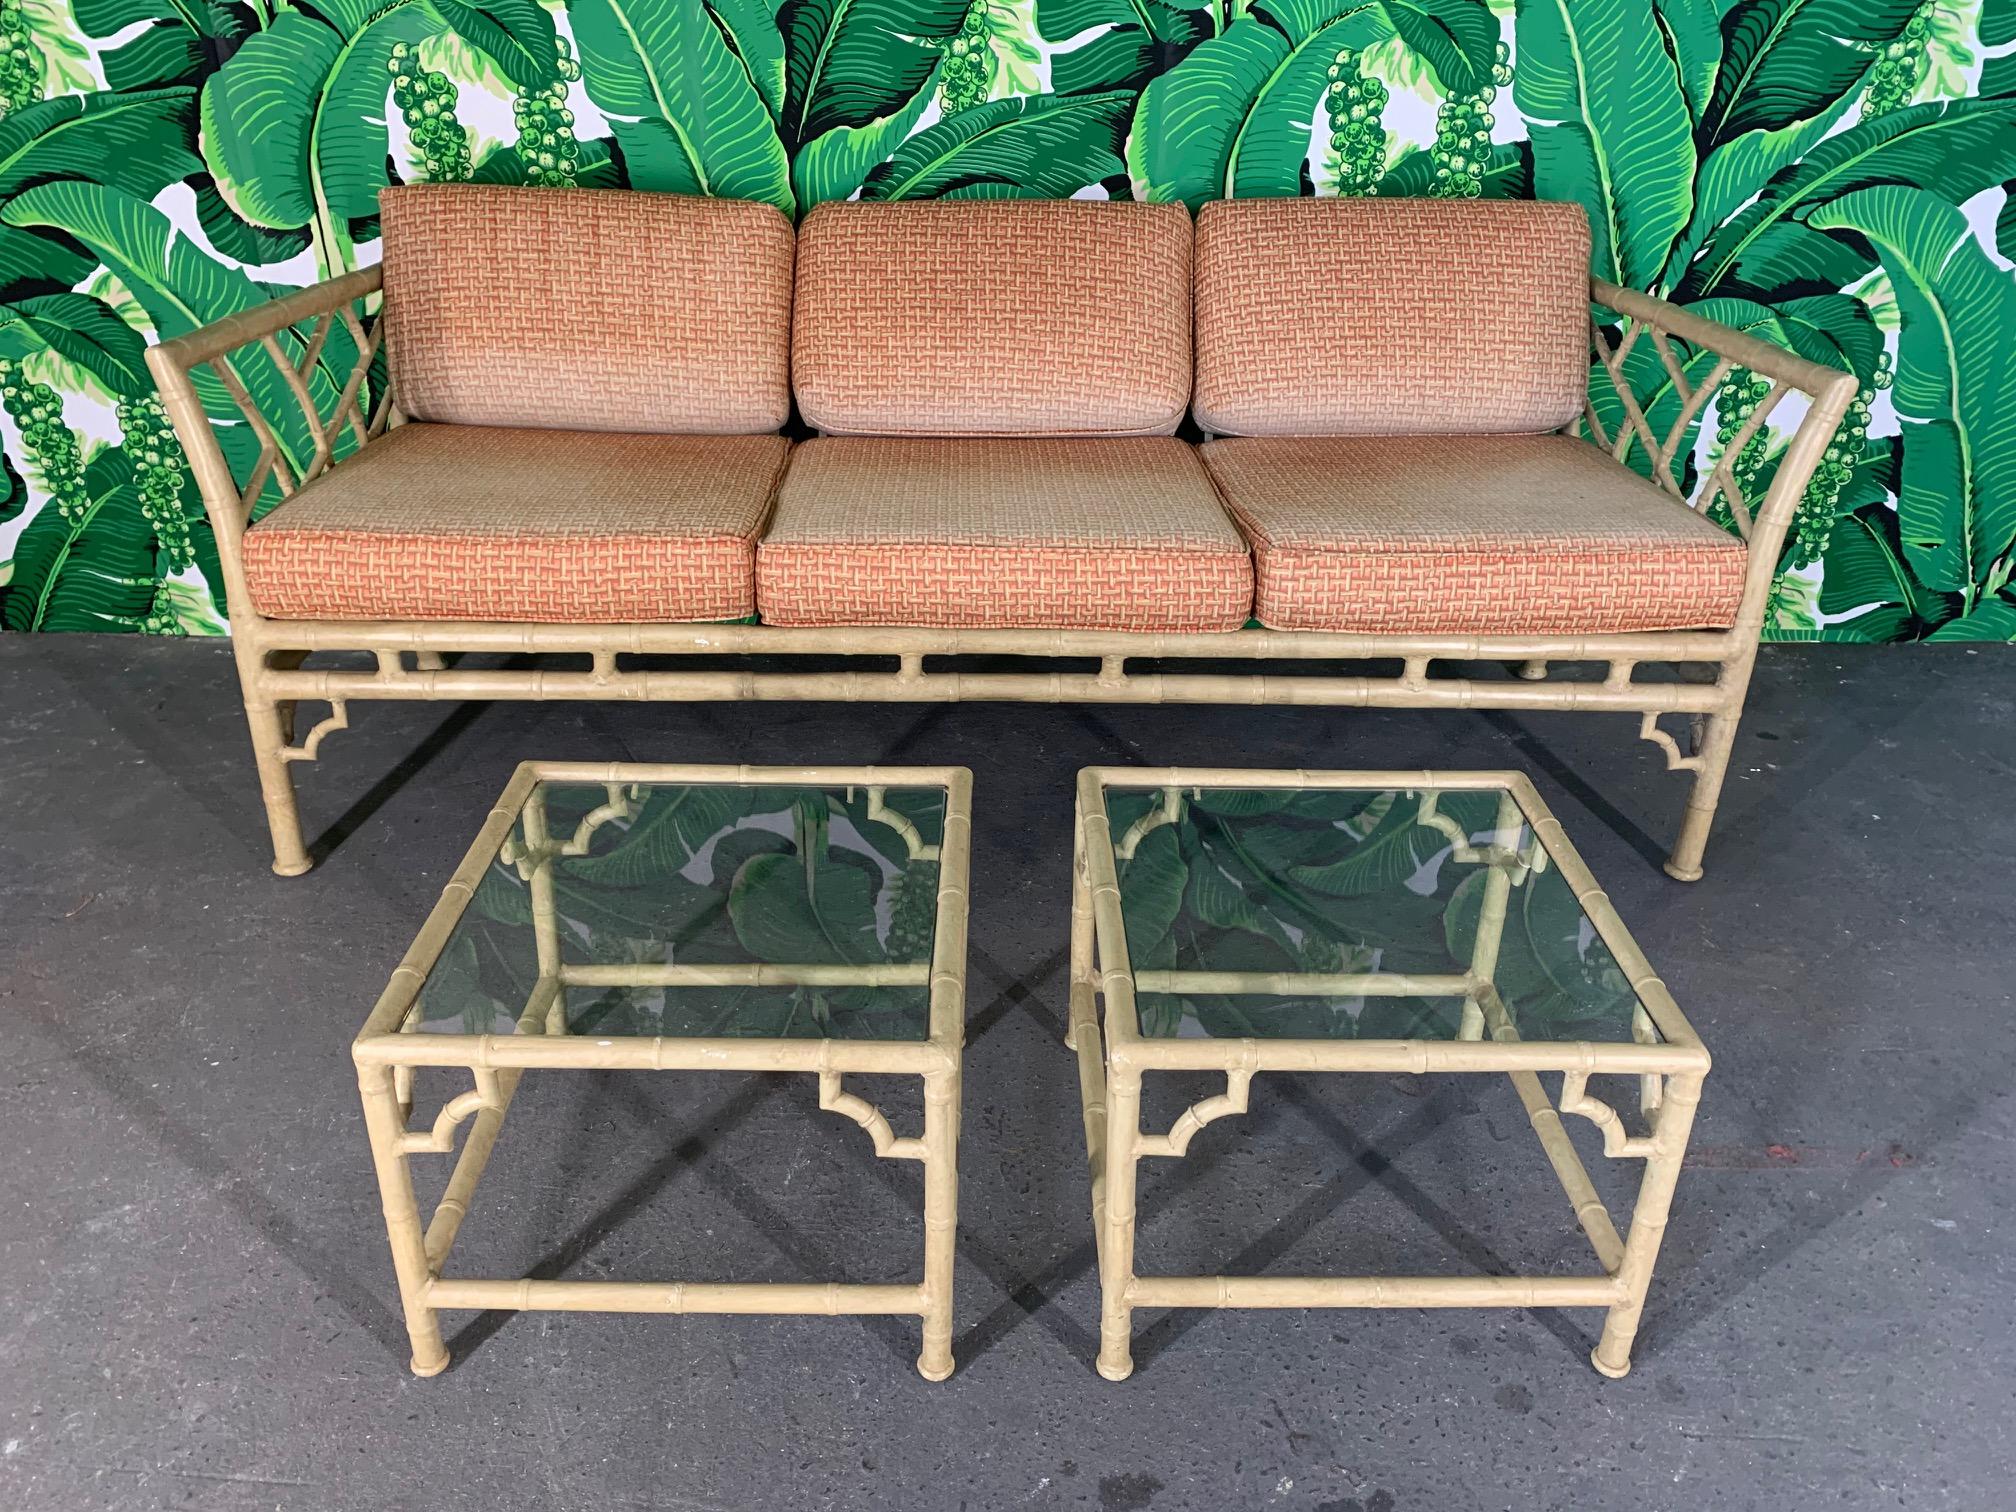 Vintage patio sofa by Meadowcraft features faux bamboo metal frame and Asian chinoiserie detailing. Very good condition with minor imperfections consistent with age, along with fading to cushions.
Sofa measures:
76